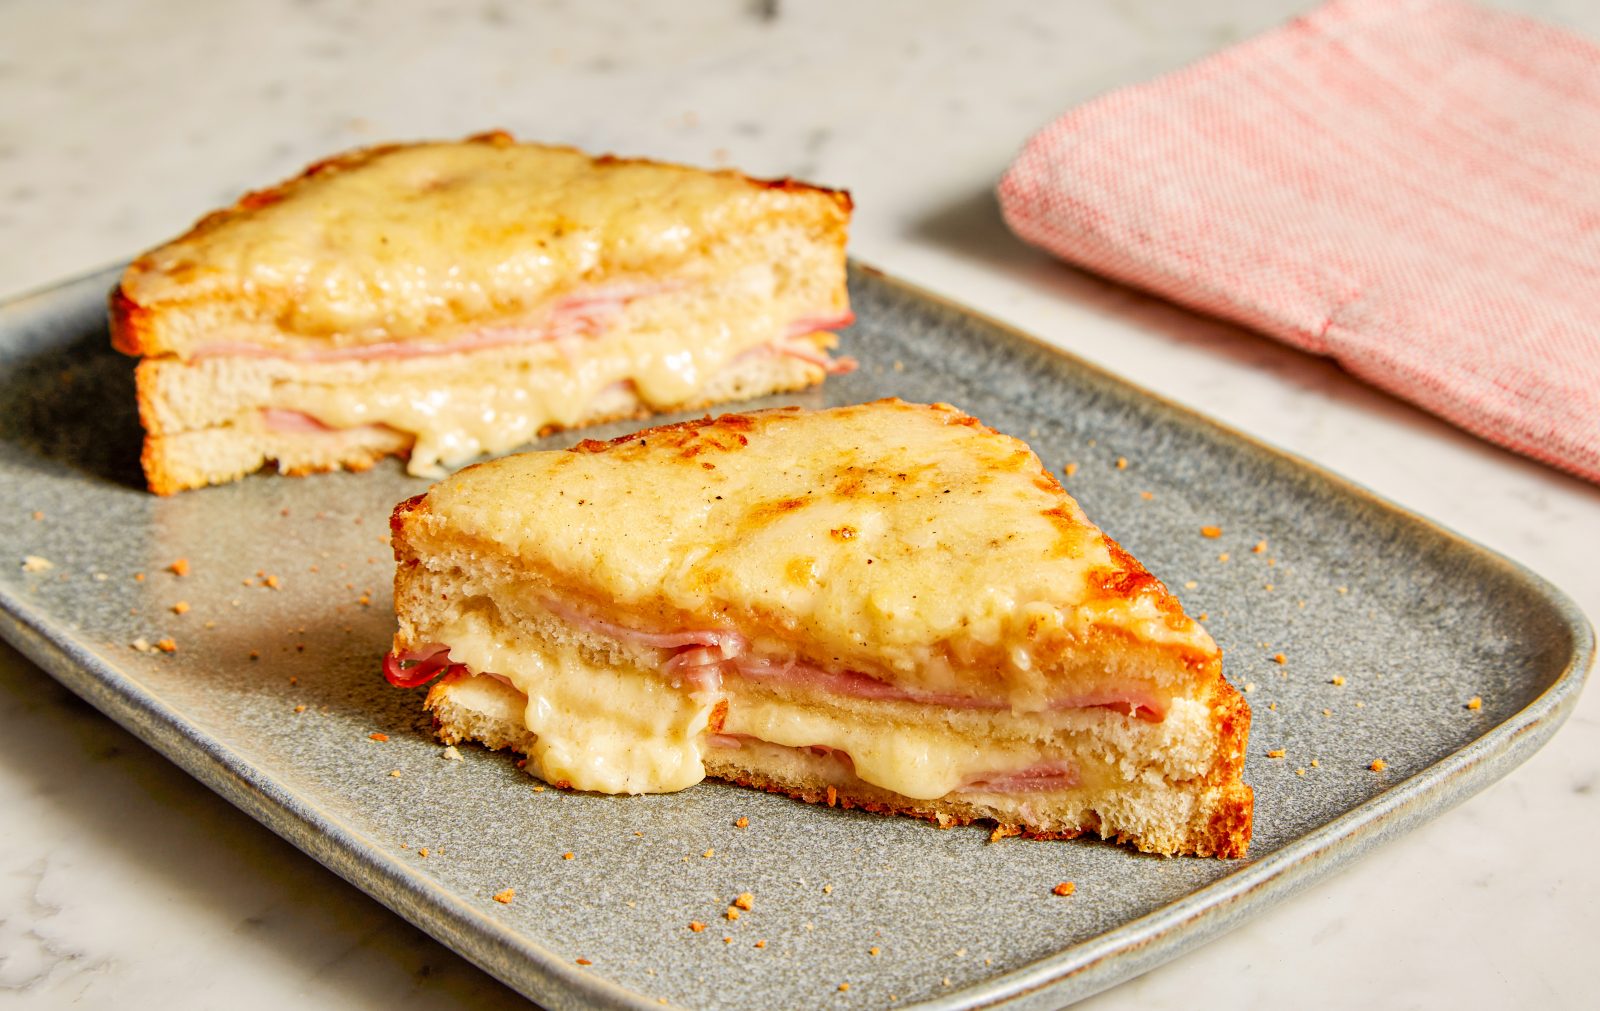 Best Oven-Baked Three-Layer Croque Monsieur Sandwiches Recipe - How to Make  Oven-Baked Three-Layer Croque Monsieur Sandwiches